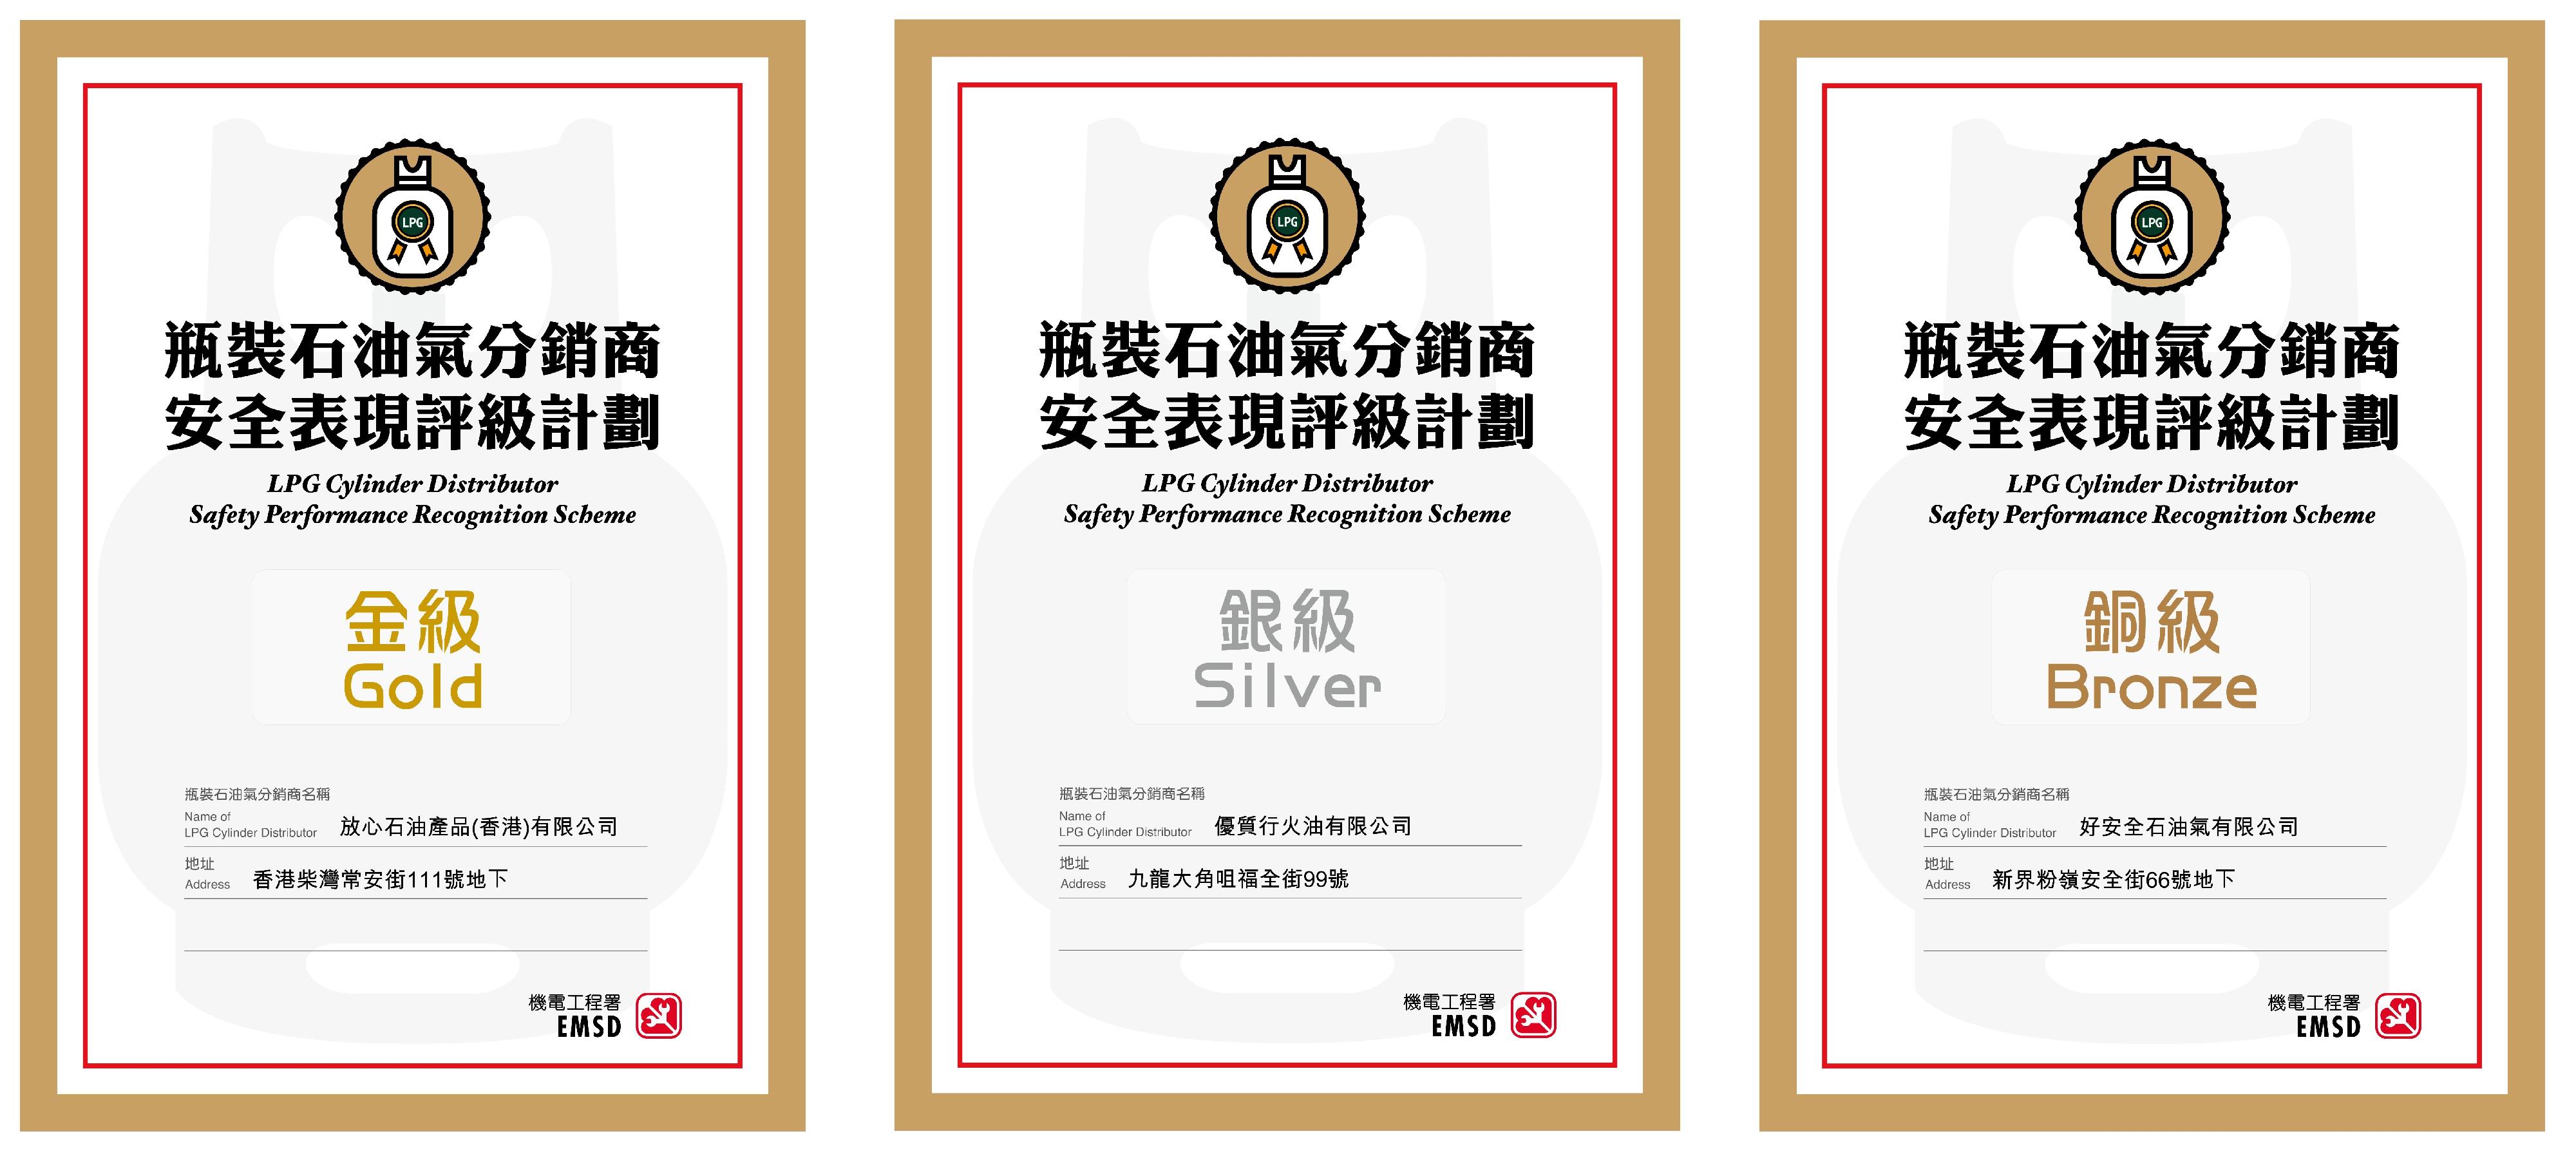 The Electrical and Mechanical Services Department announced today (April 29) the rating results of the Liquefied Petroleum Gas (LPG) Cylinder Distributor Safety Performance Recognition Scheme for 2021. Picture shows the certificates of the gold, silver and bronze ratings under the LPG Cylinder Distributor Safety Performance Recognition Scheme.